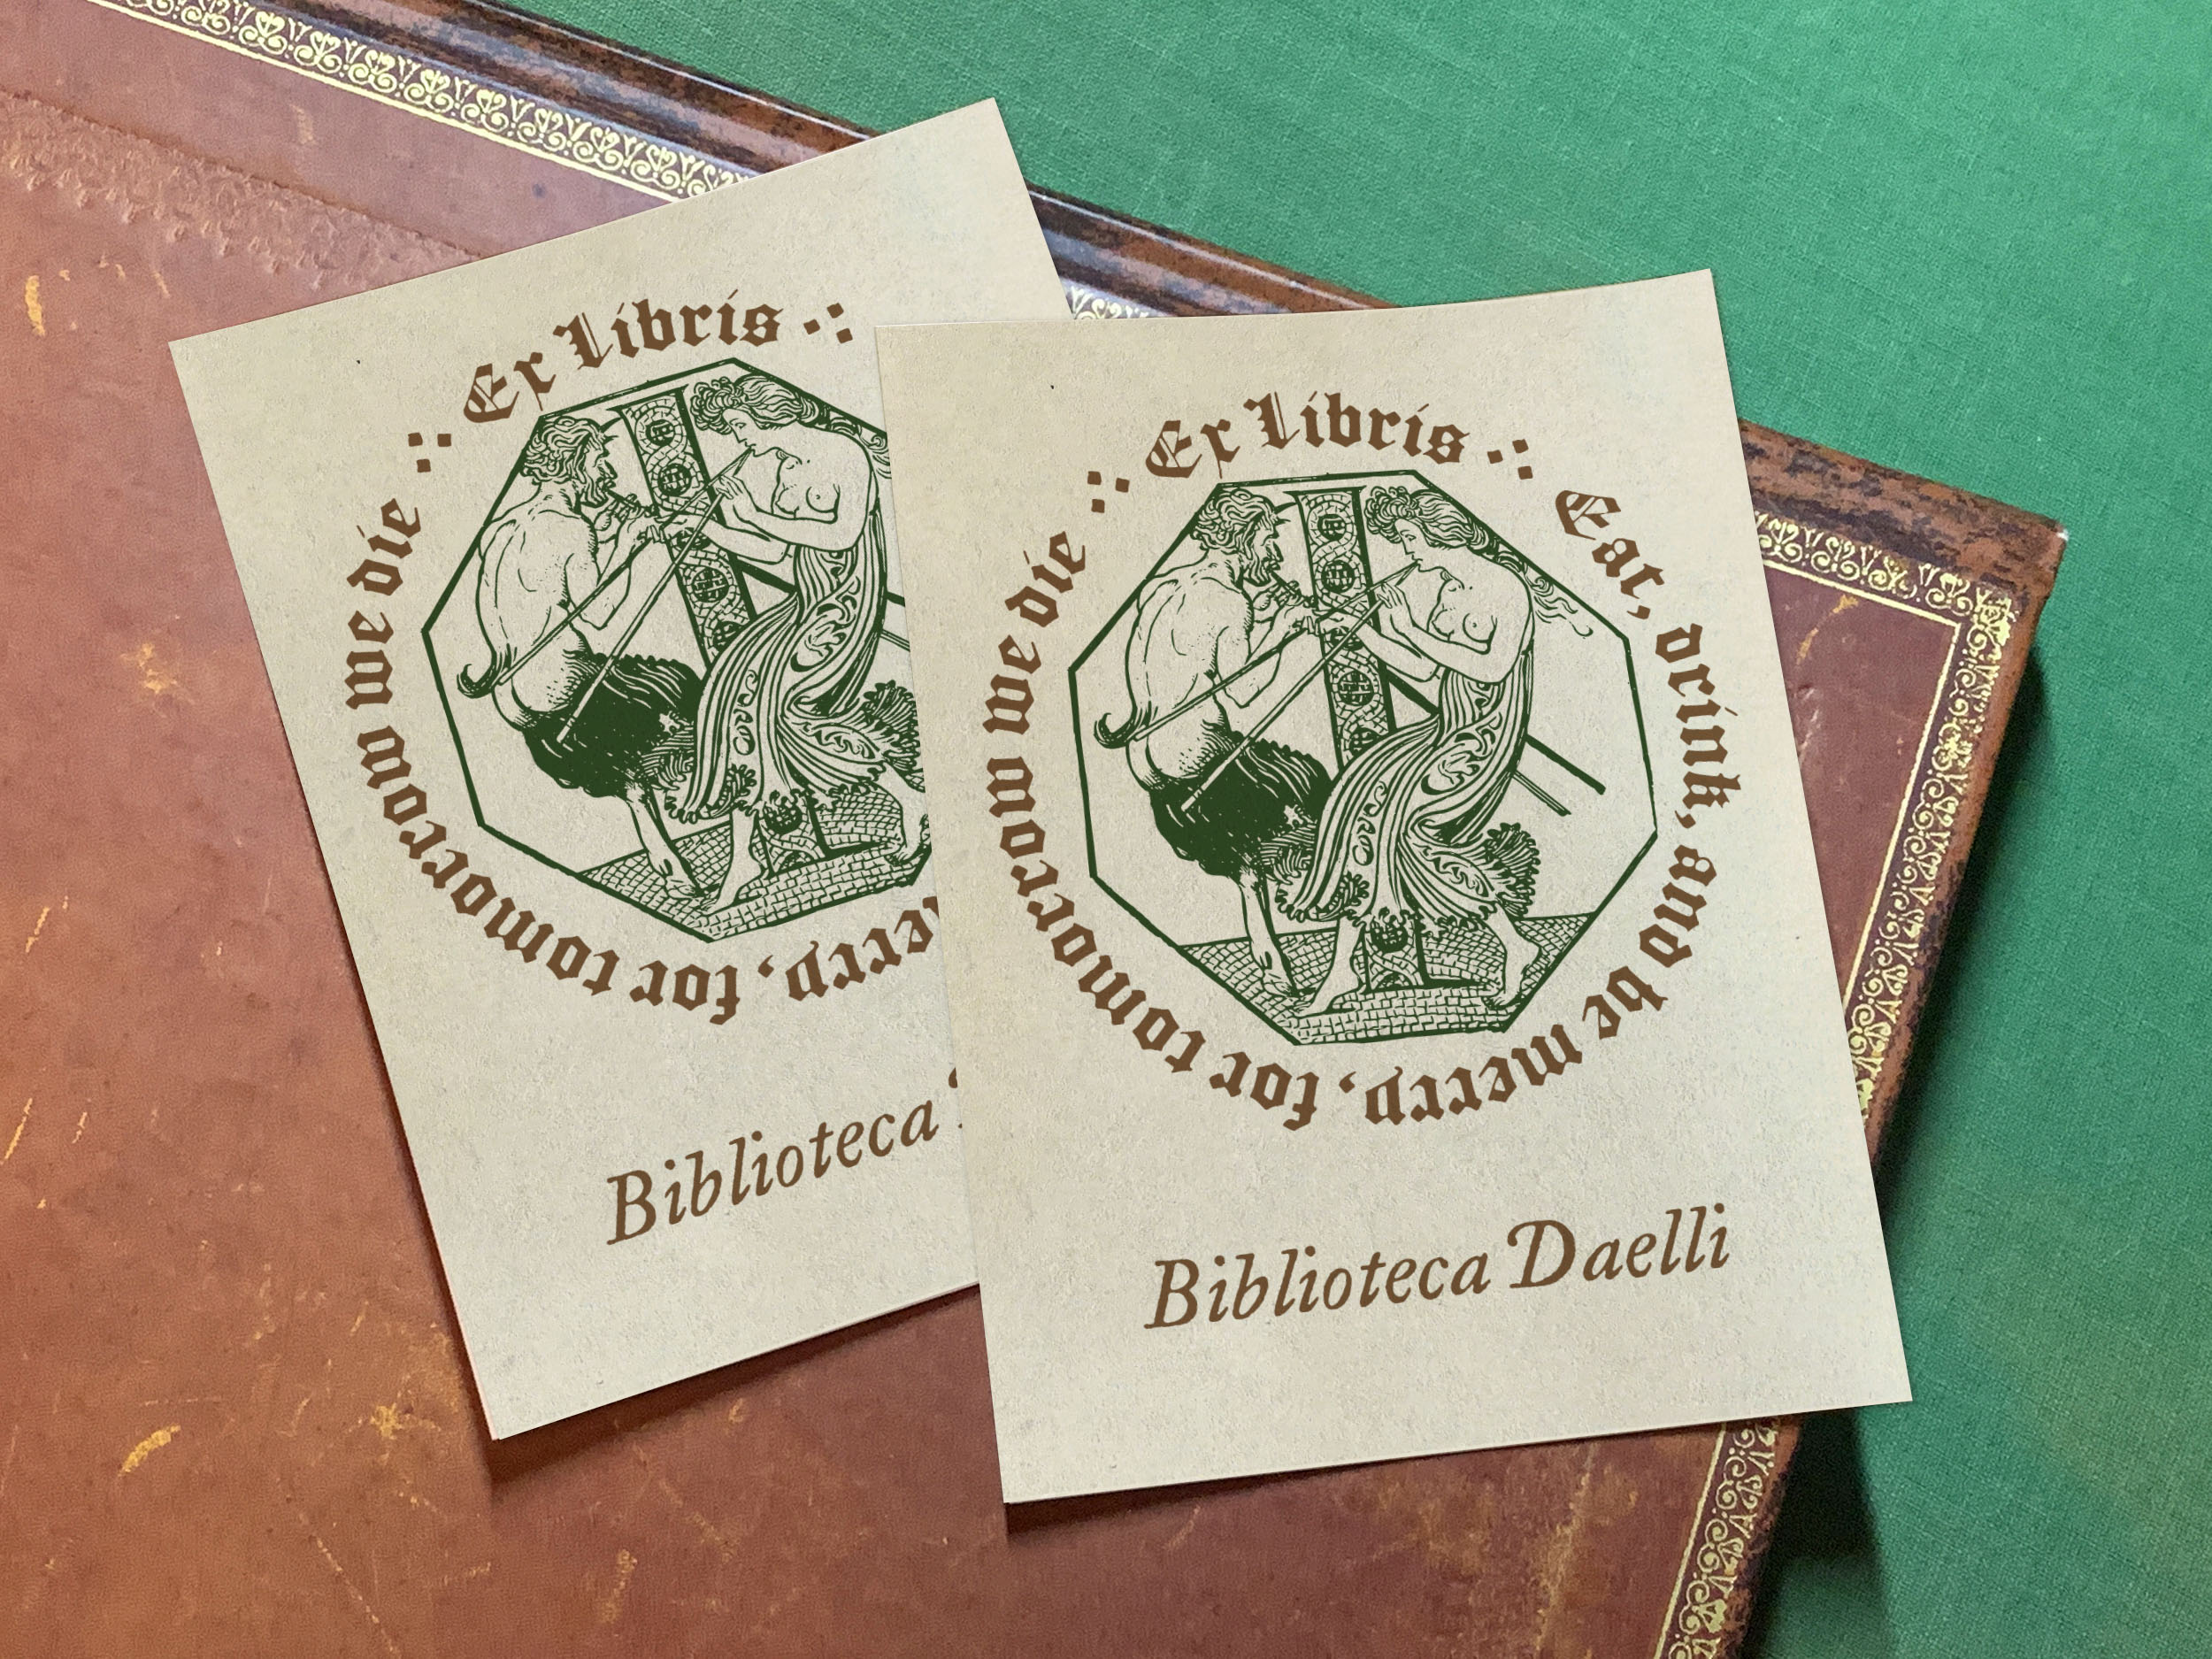 Bacchanalia, Personalized, Ex-Libris Bookplates, Crafted on Traditional Gummed Paper, 3in x 4in, Set of 30